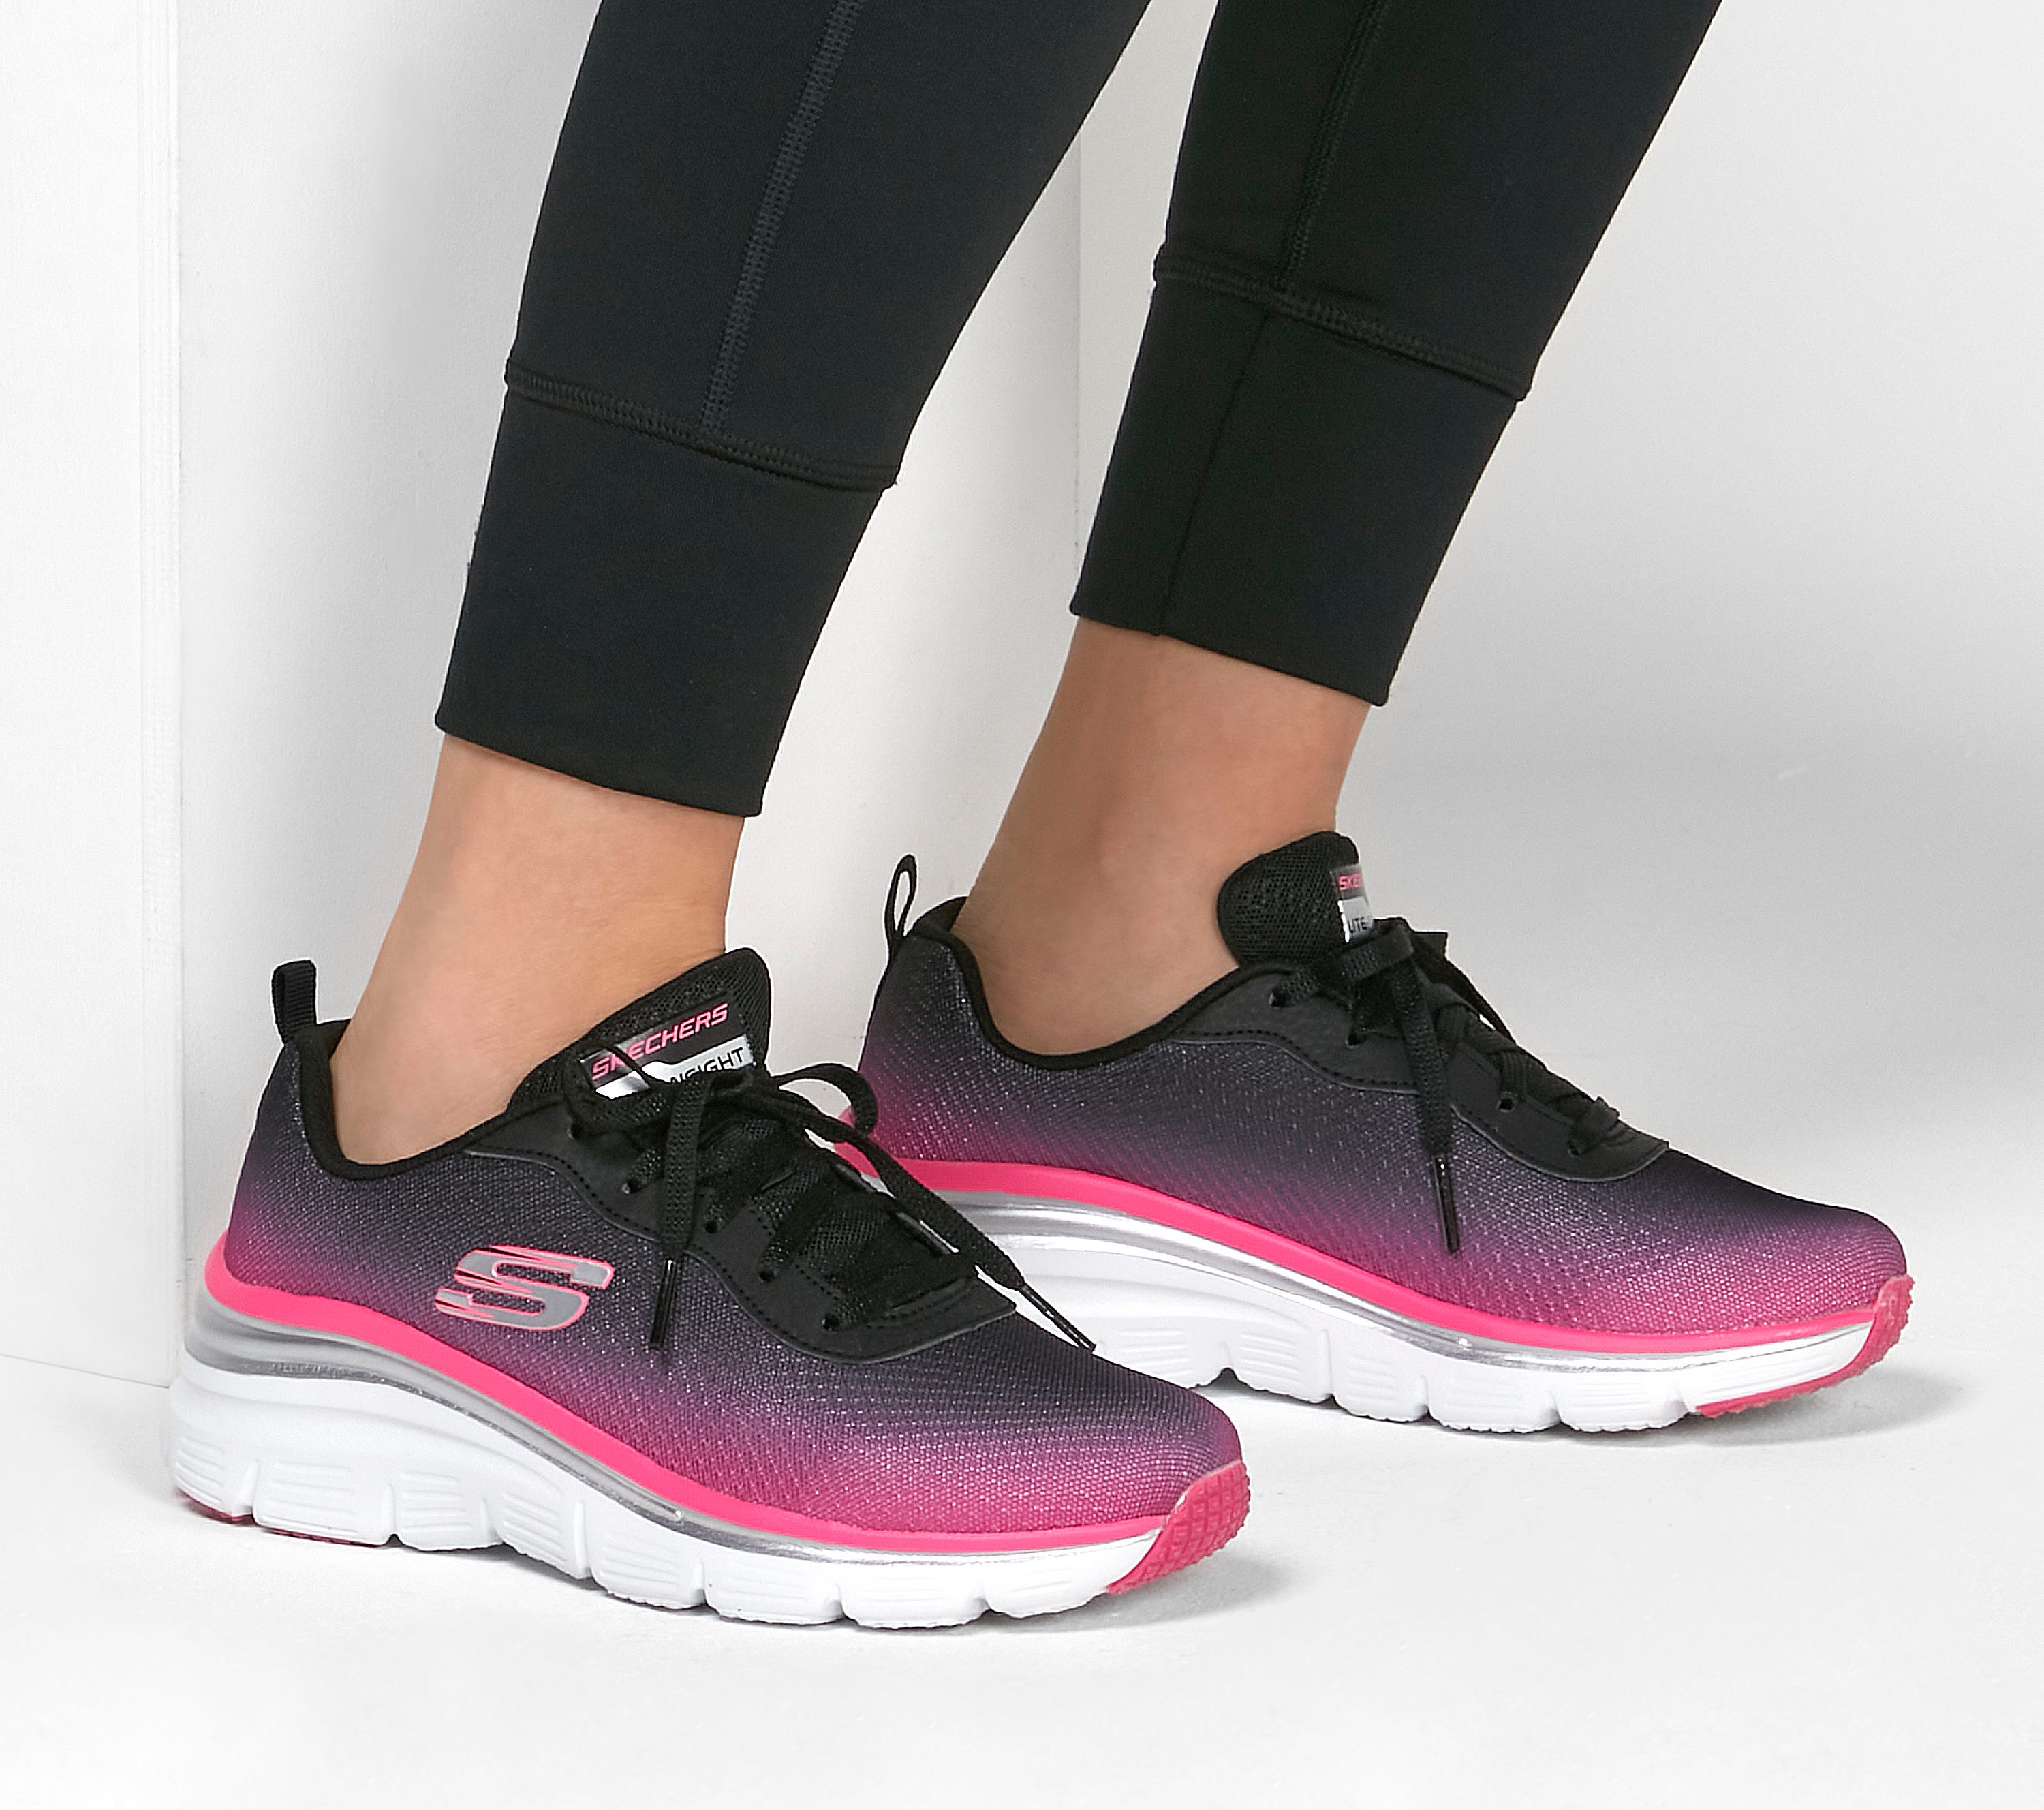 Leia Banyan Skynd dig Fashion Fit - Build Up | SKECHERS